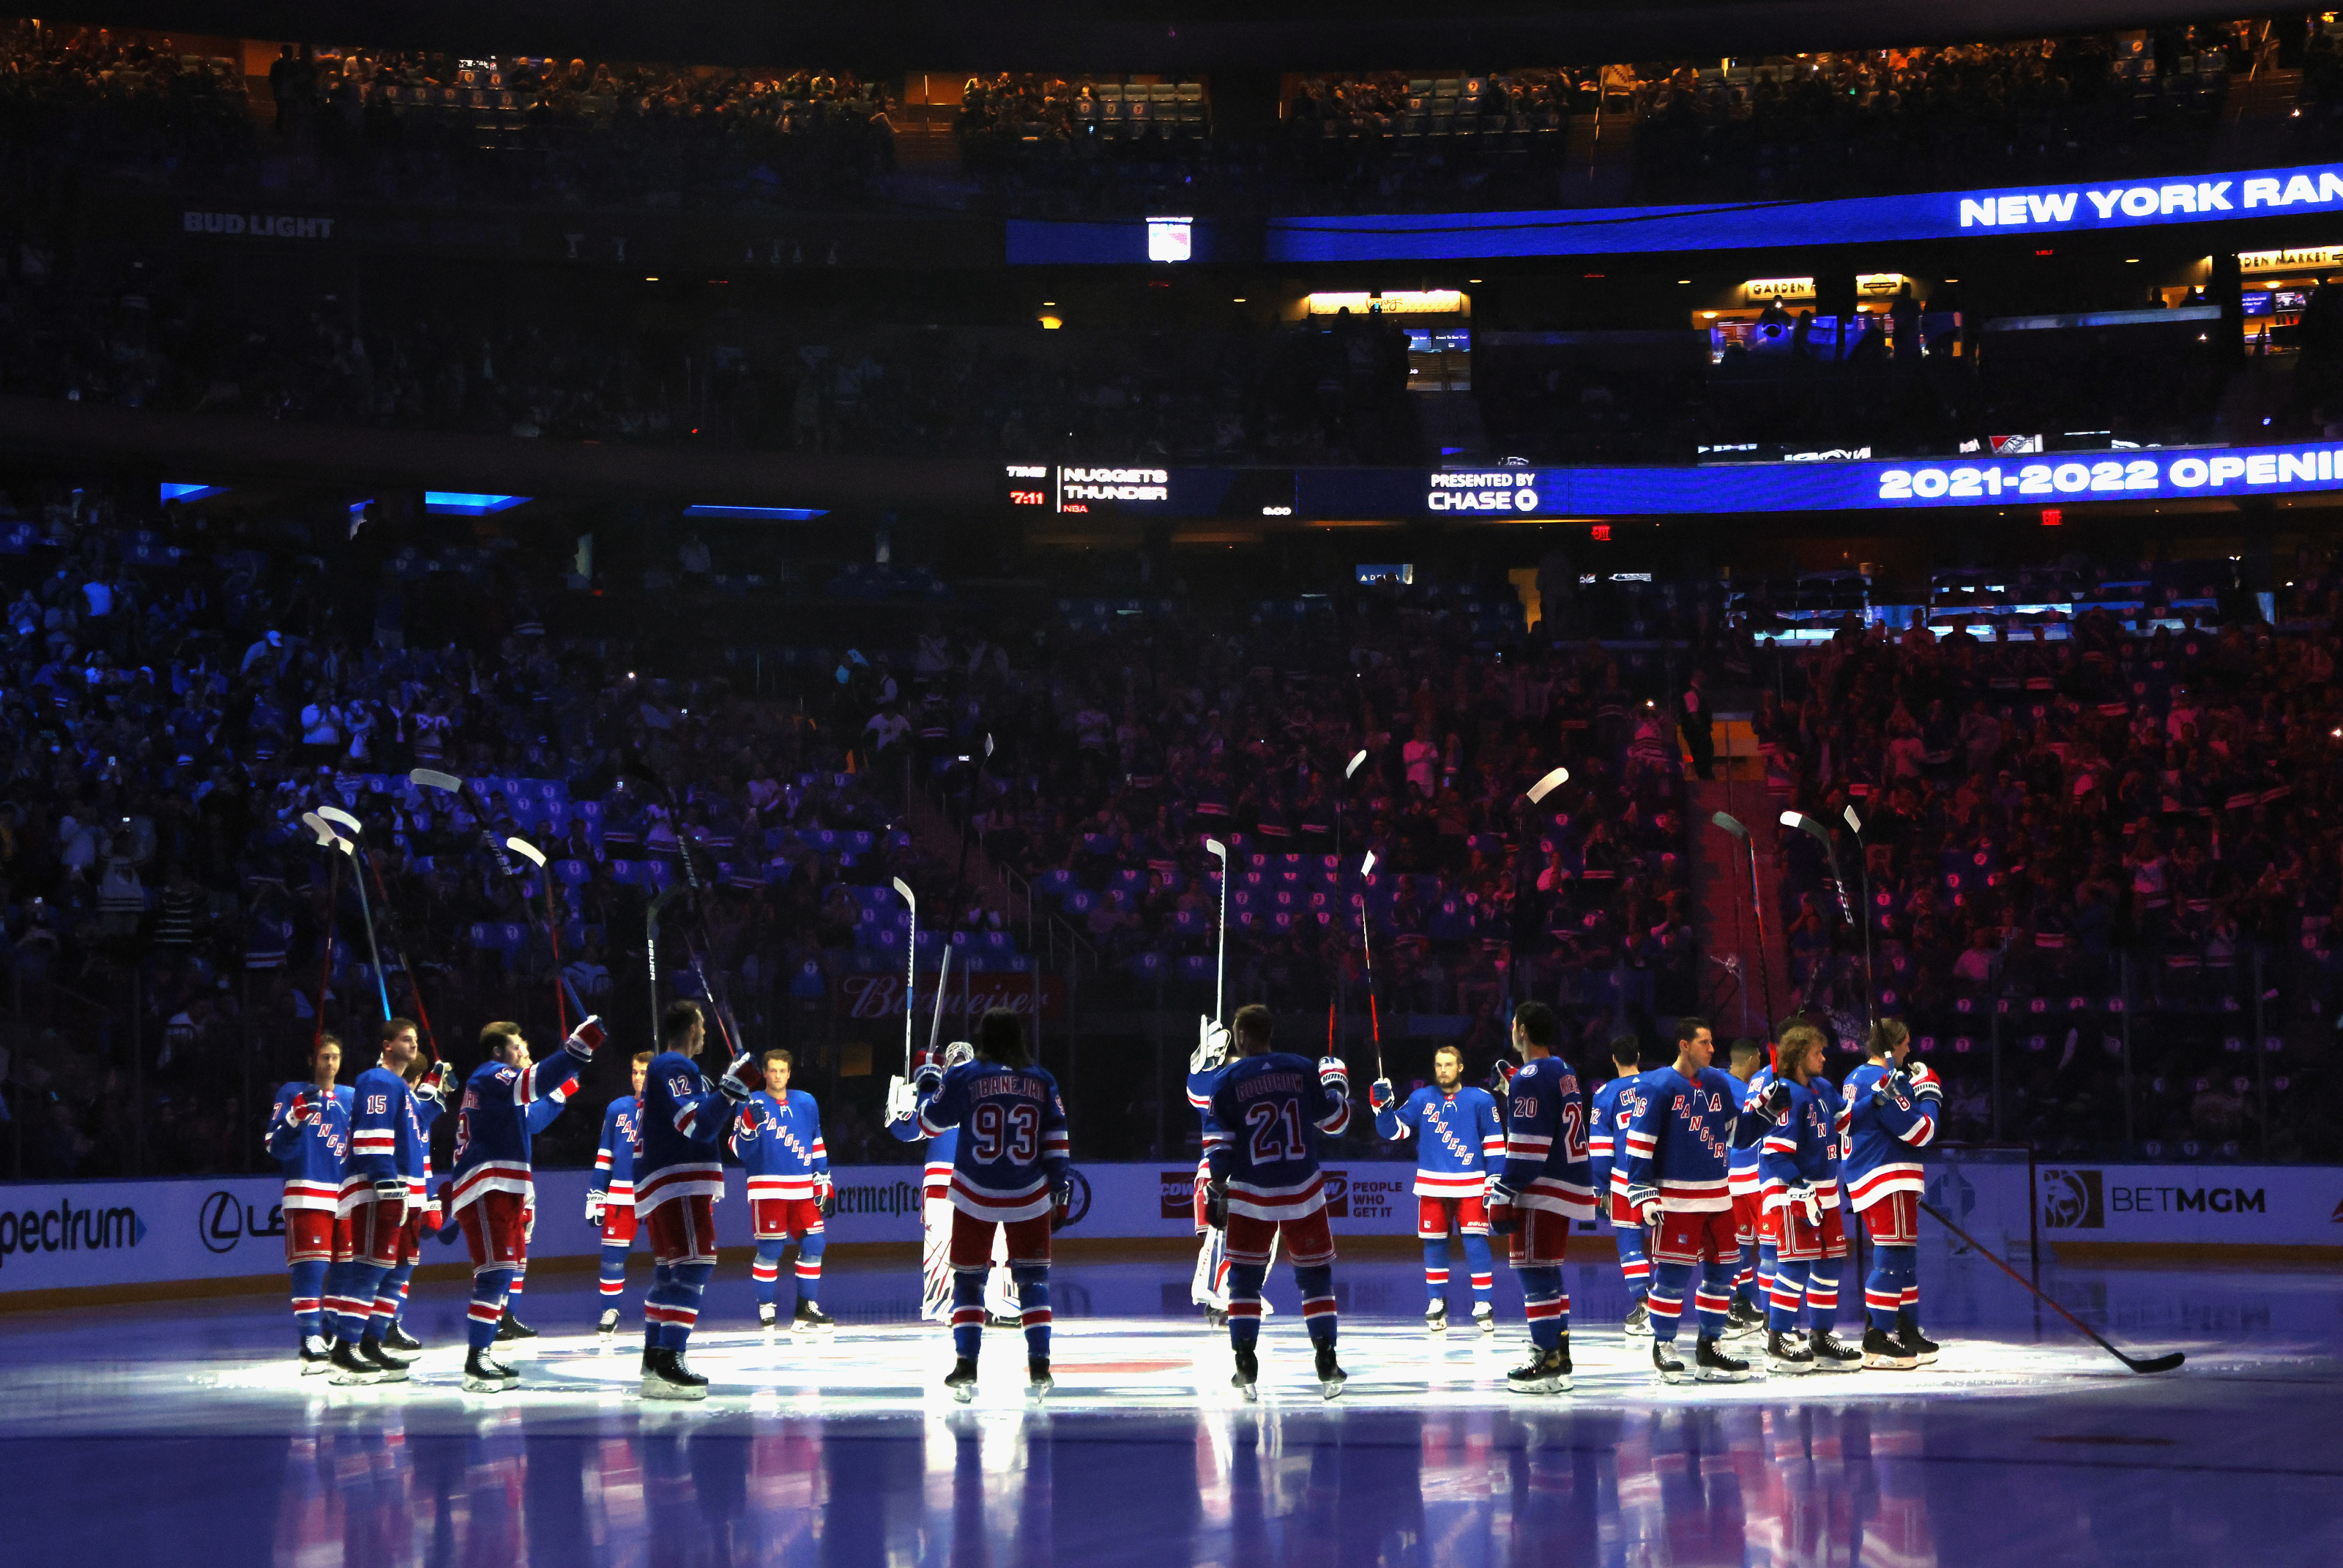 What to expect from the next 10 New York Rangers games #61-70